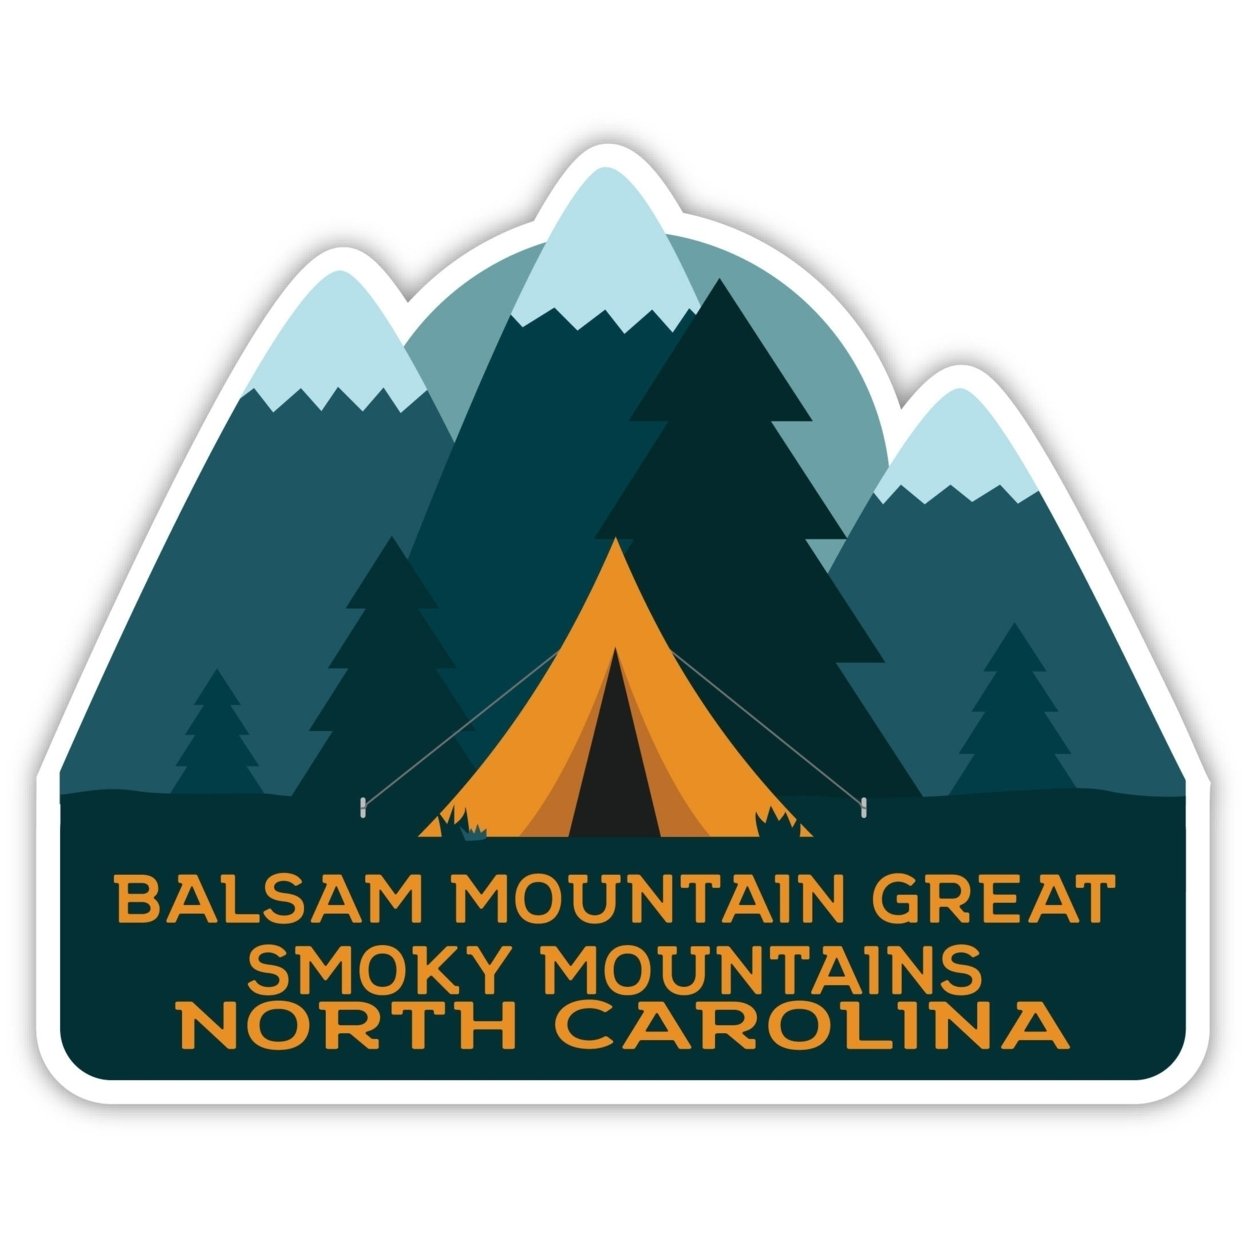 Balsam Mountain Great Smoky Mountains North Carolina Souvenir Decorative Stickers (Choose Theme And Size) - Single Unit, 8-Inch, Tent